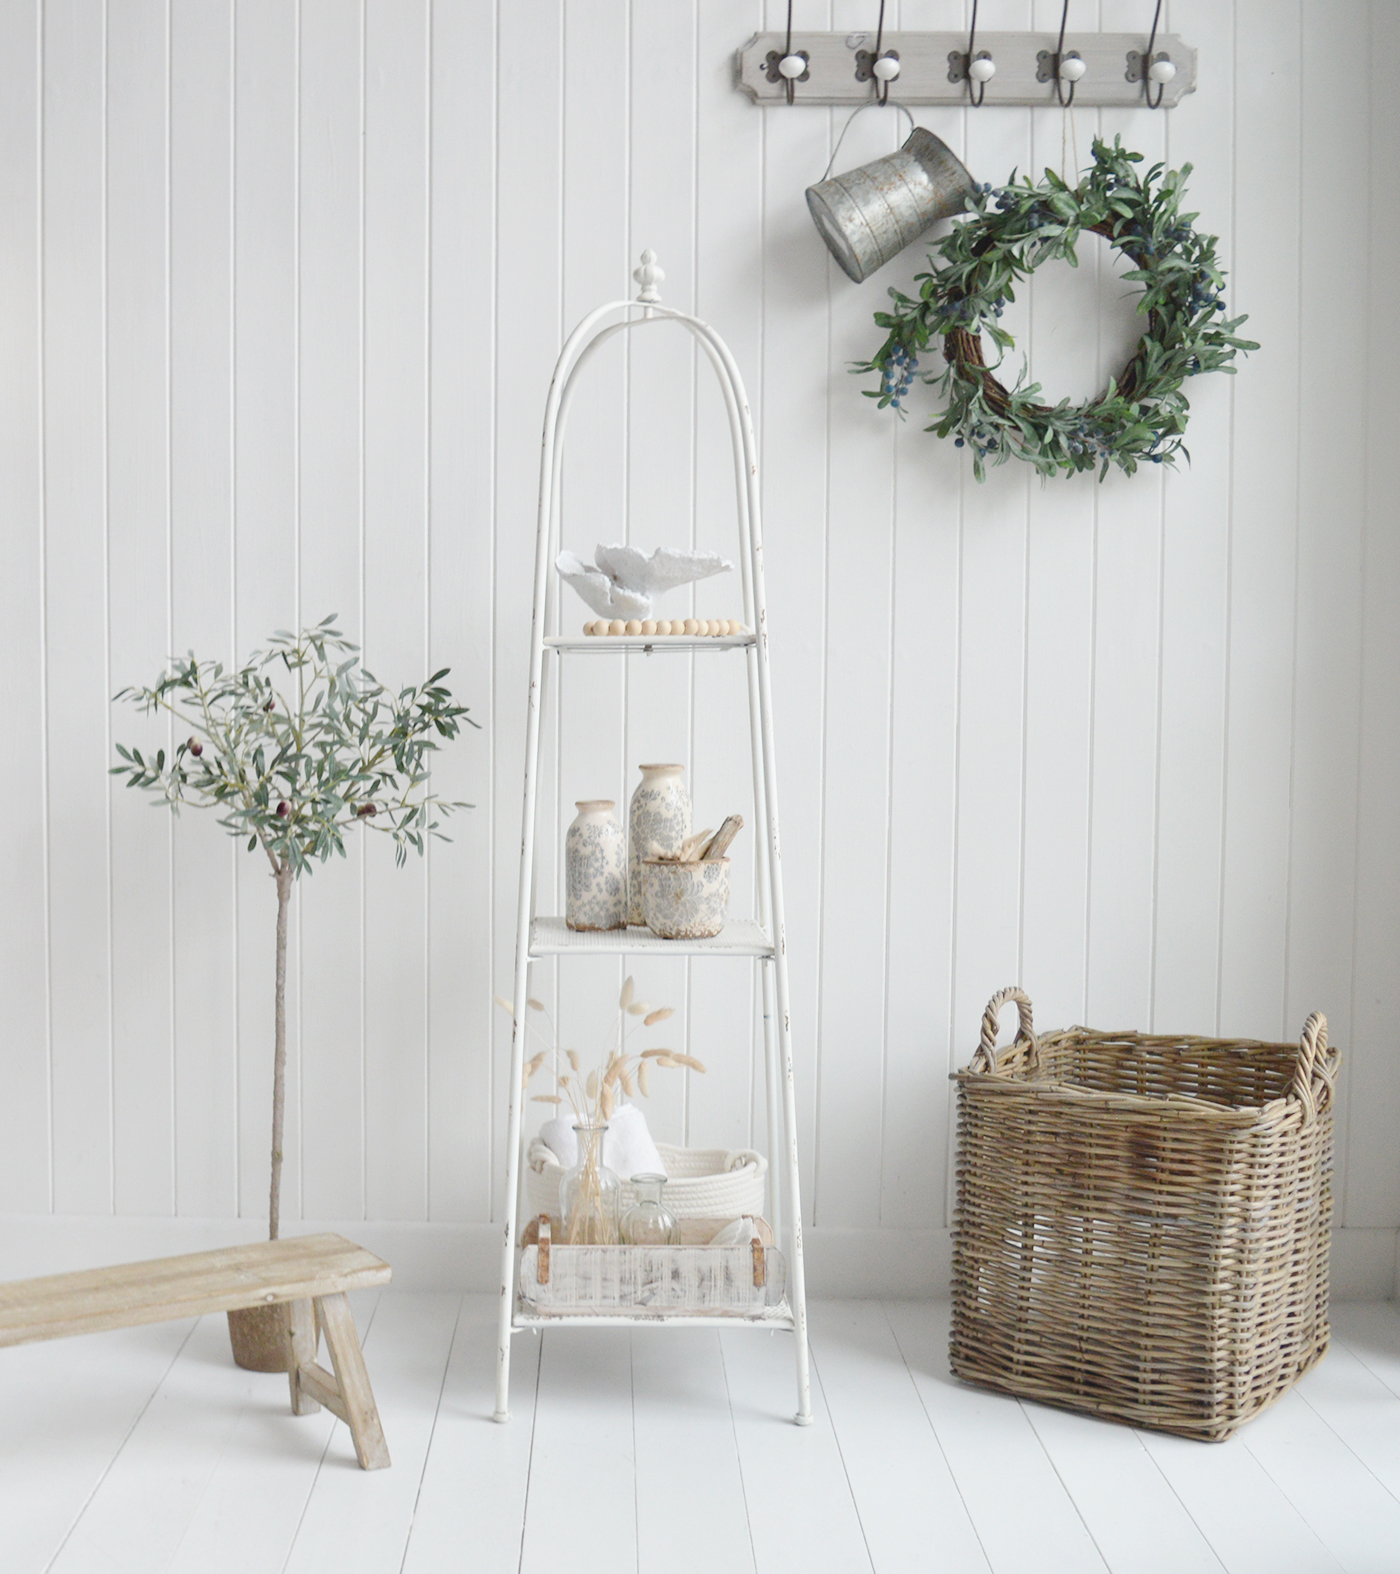 Chesterville White Freestanding Shelf - New England White Furniture for coastal and country homes and interiors